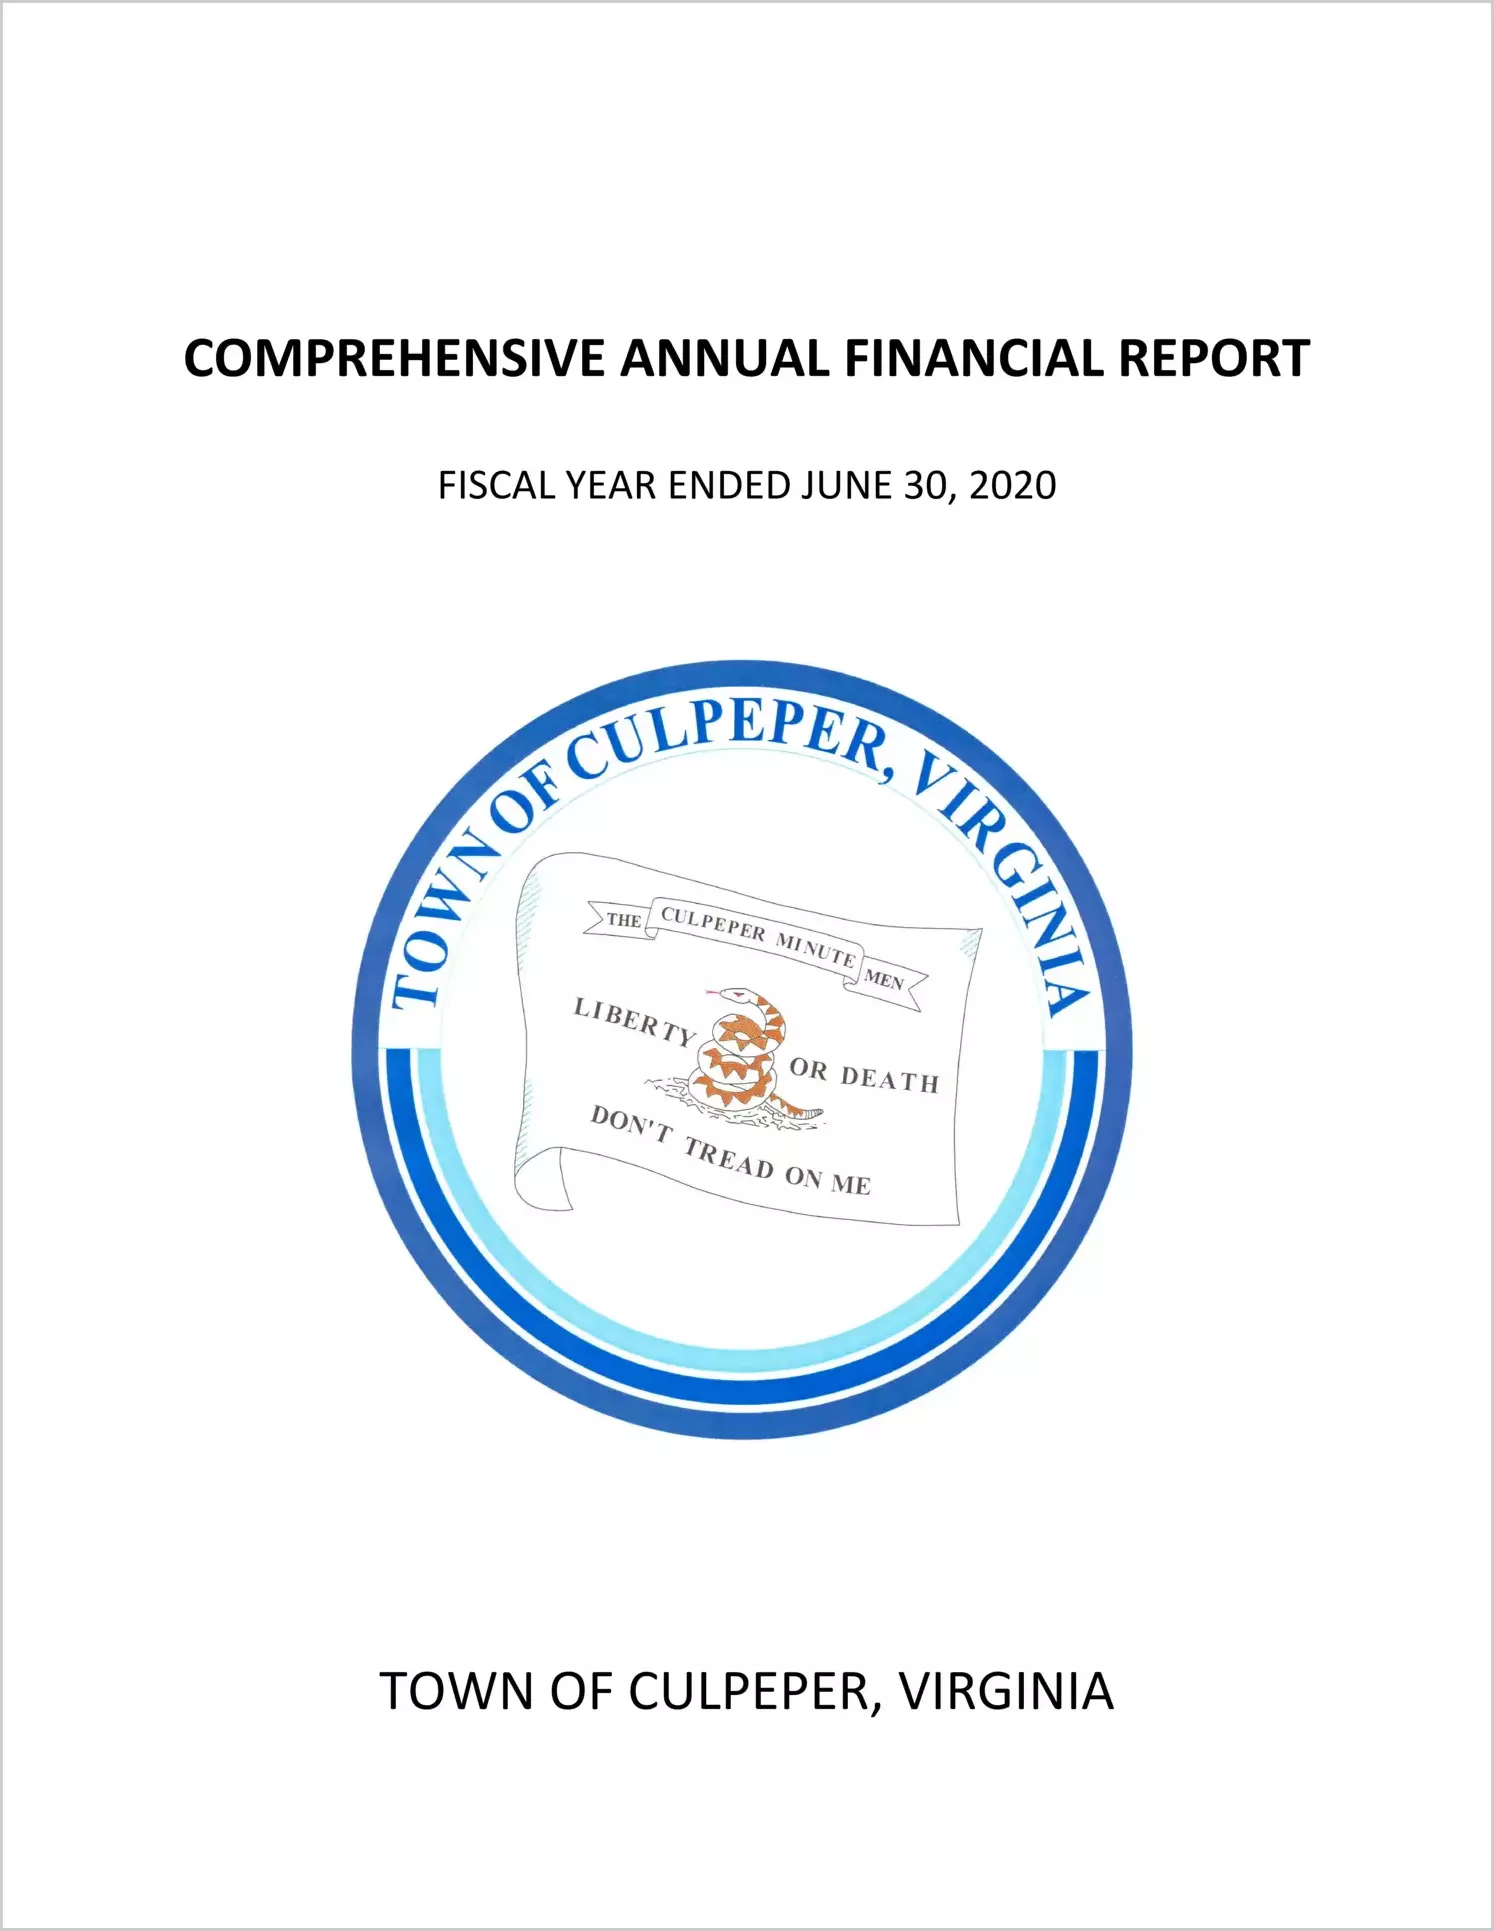 2020 Annual Financial Report for Town of Culpeper